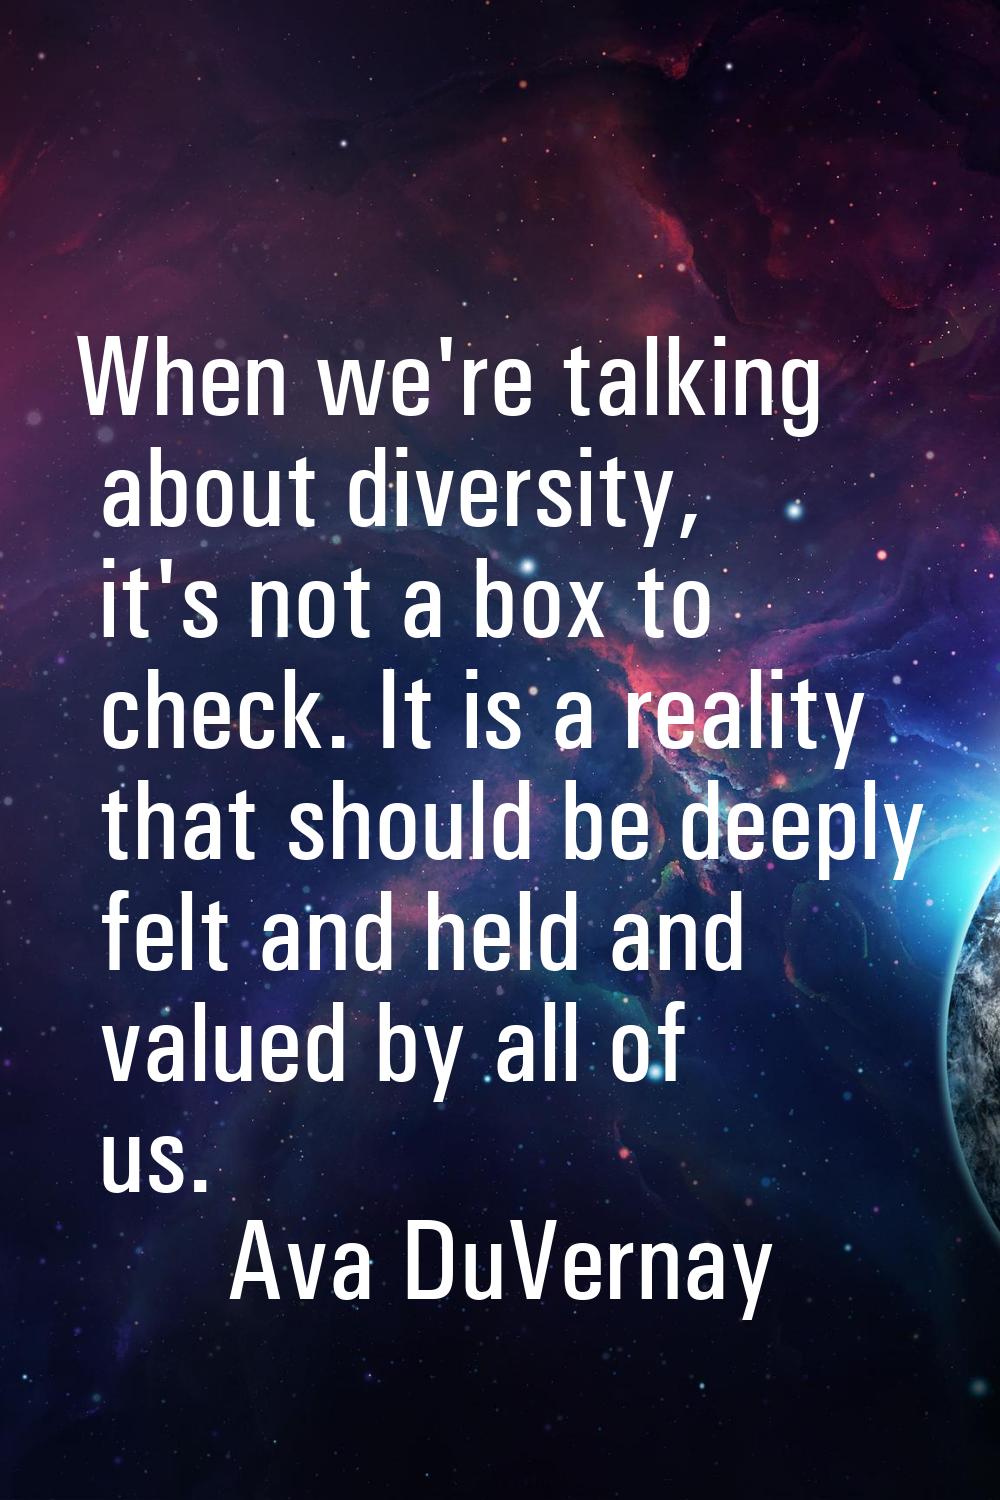 When we're talking about diversity, it's not a box to check. It is a reality that should be deeply 